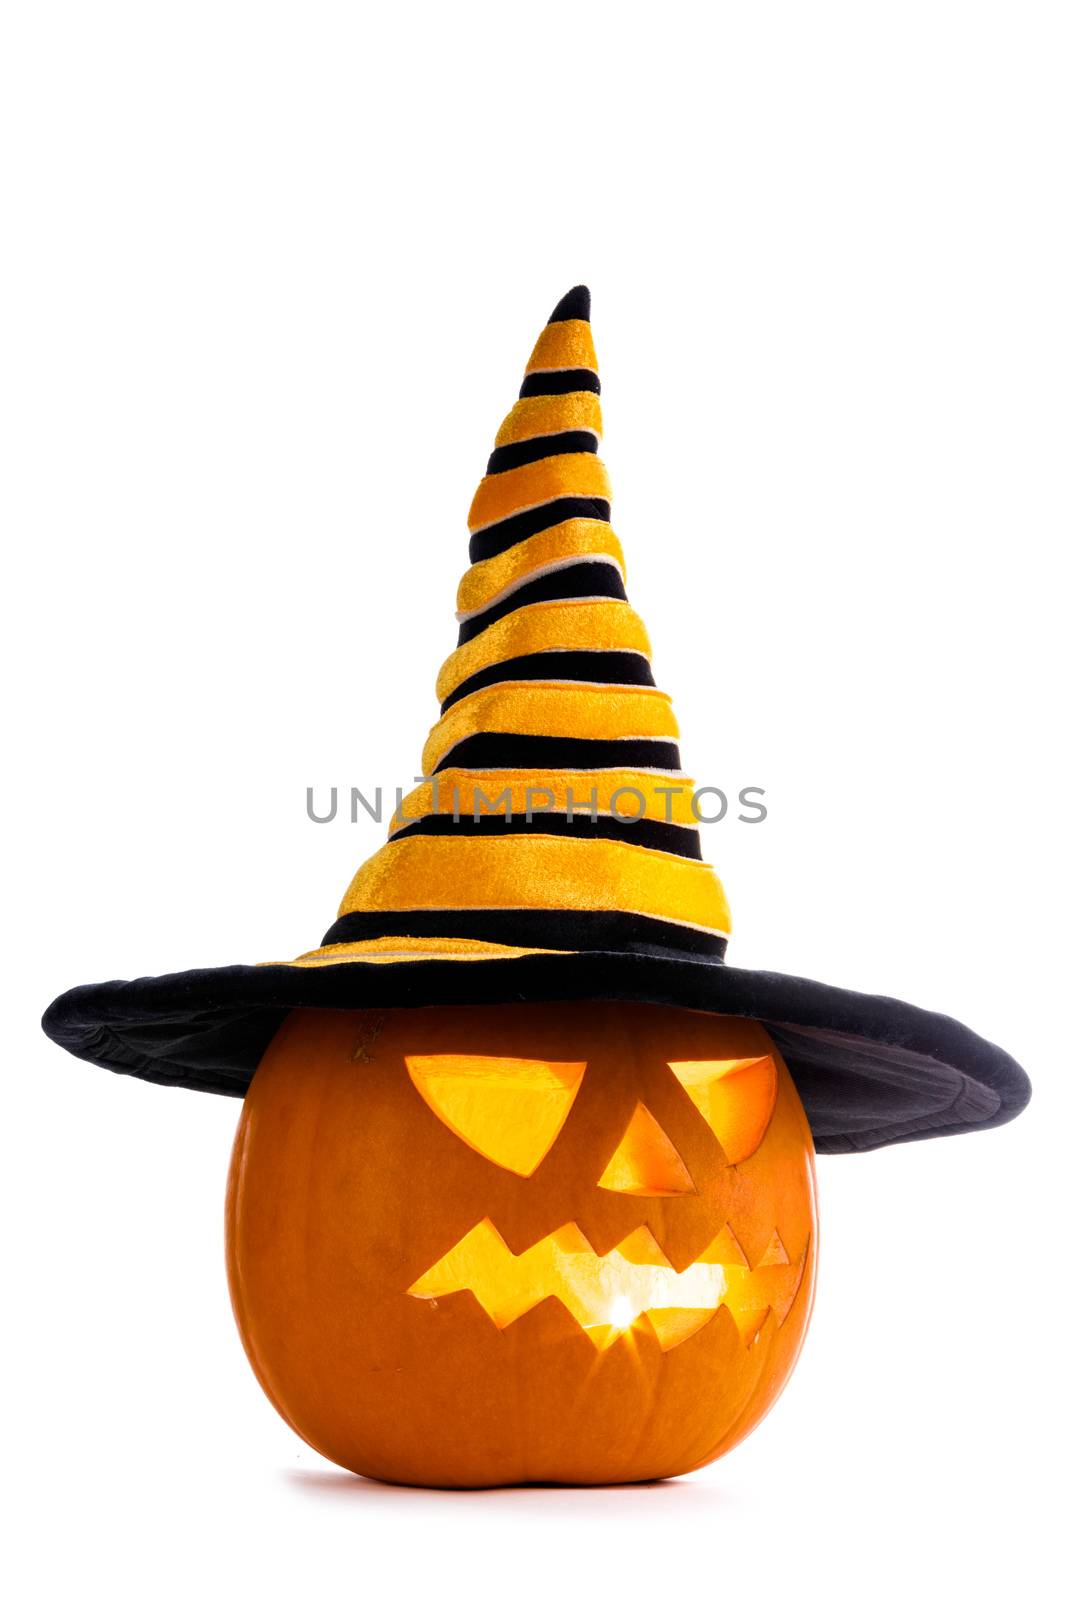 Halloween pumpkin with witches hat by Yellowj